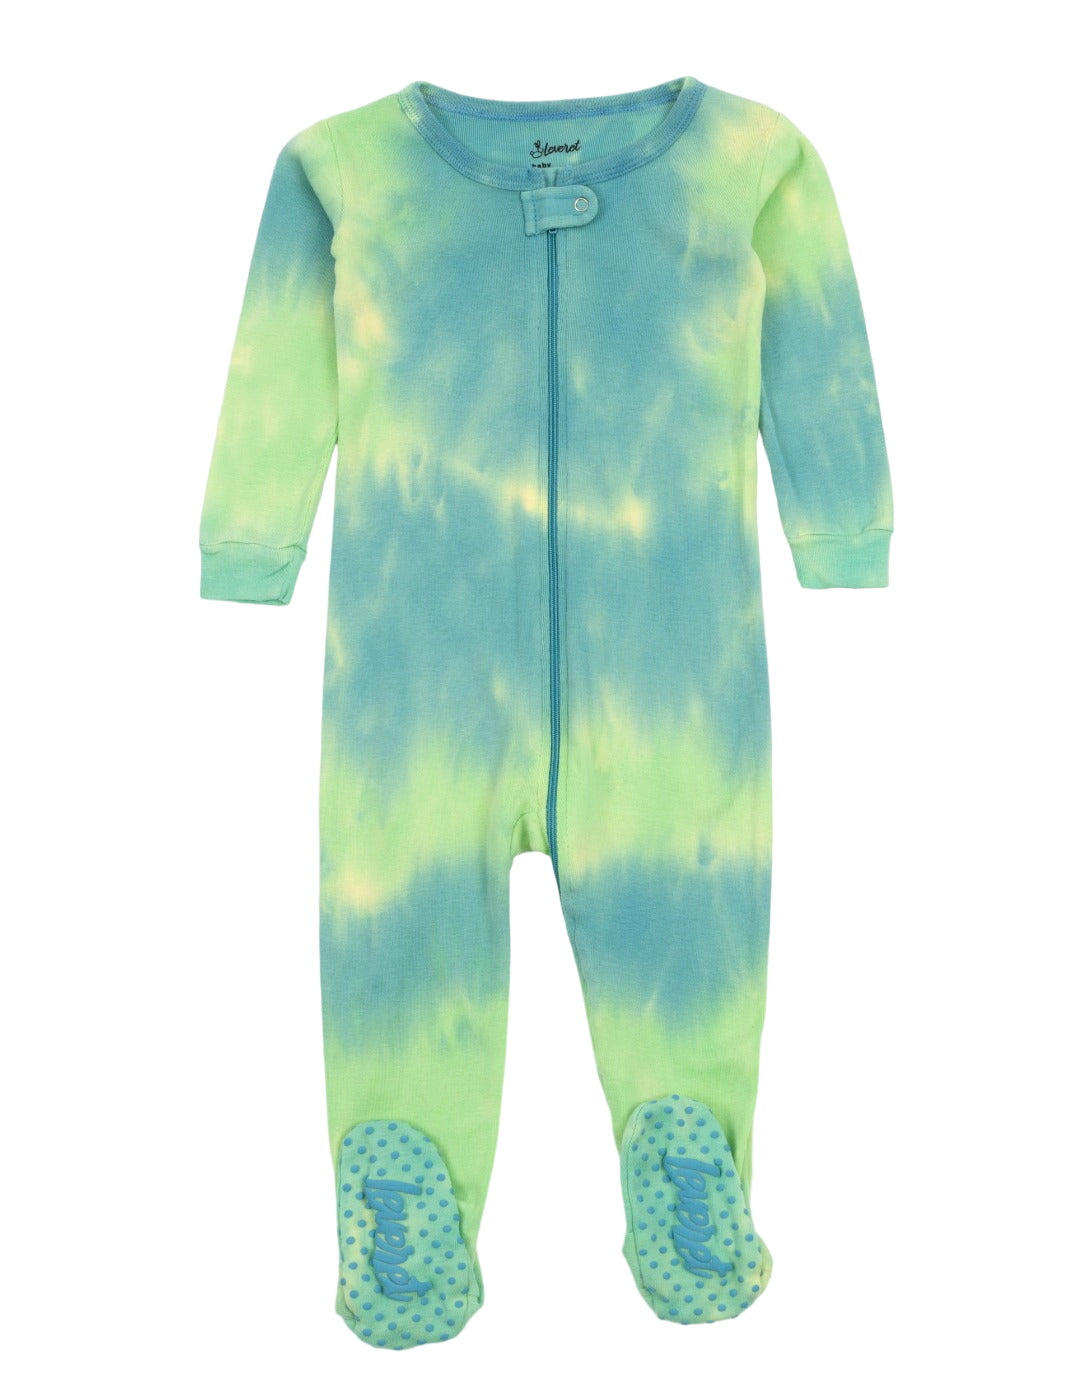 Kids Footed Colorful Mix Tie Dye Cotton Pajamas